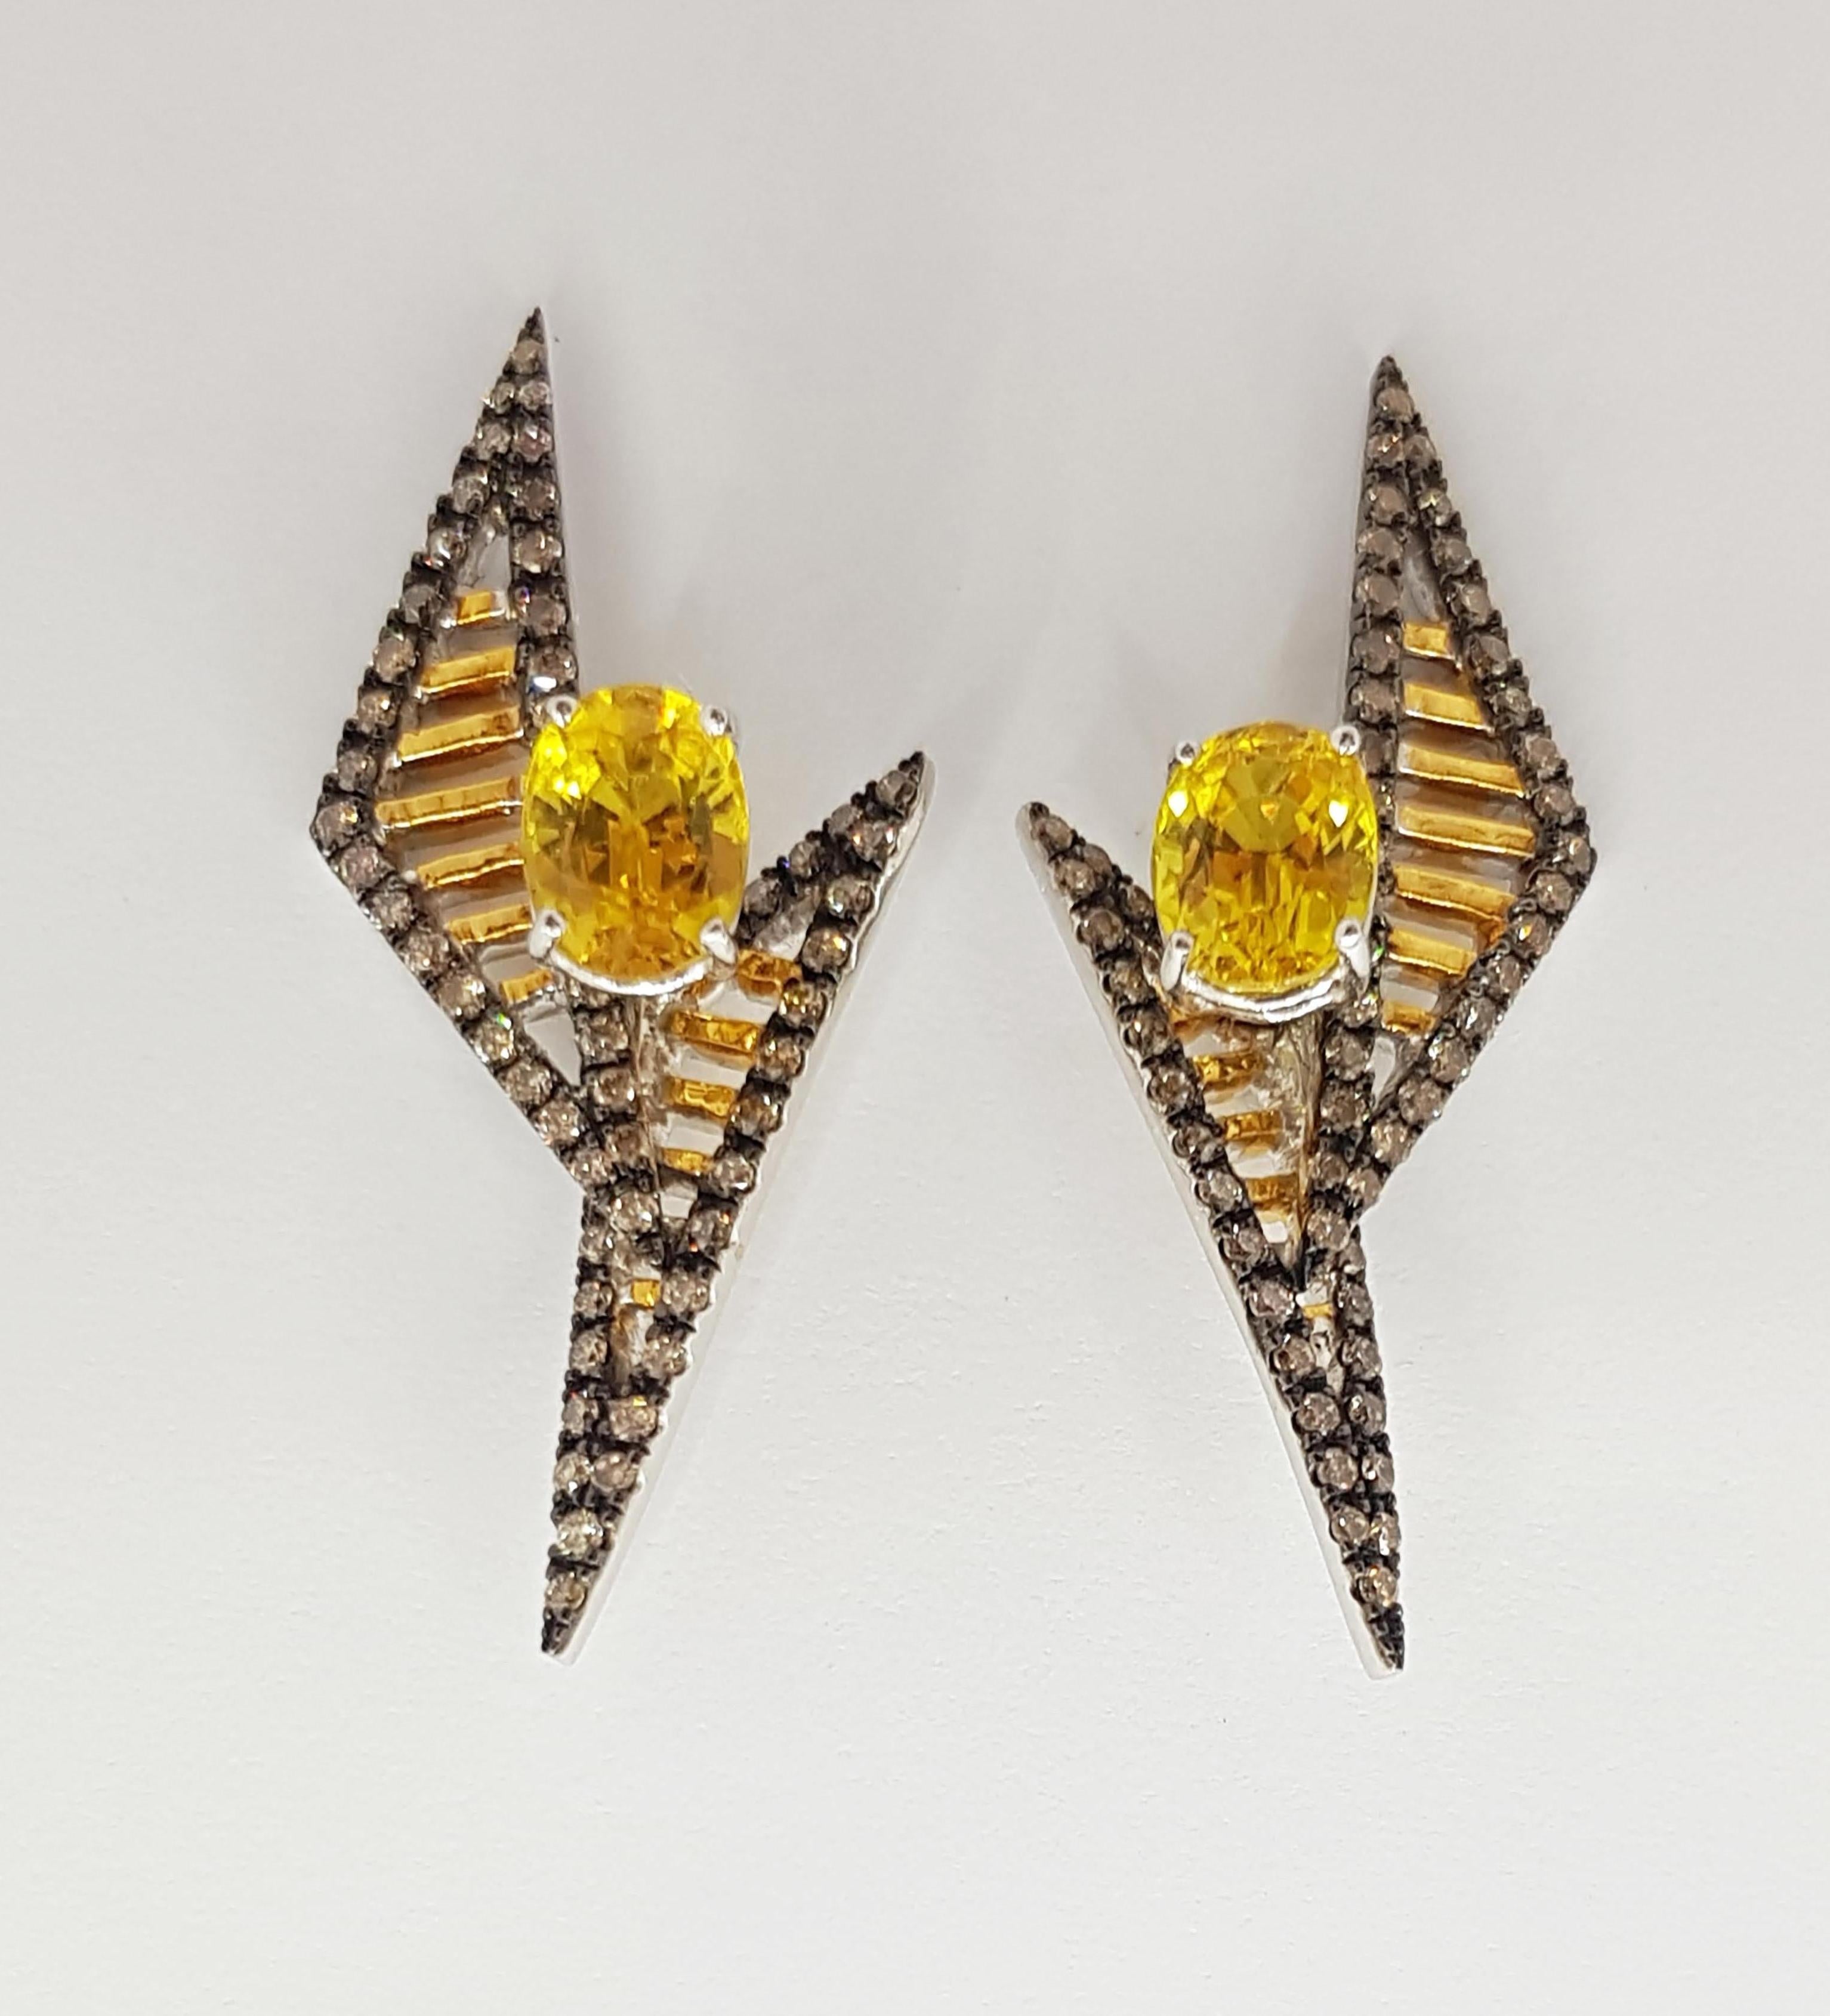 Oval Cut Yellow Sapphire with Brown Diamond Earrings Set in 18K Gold by Kavant & Sharart For Sale